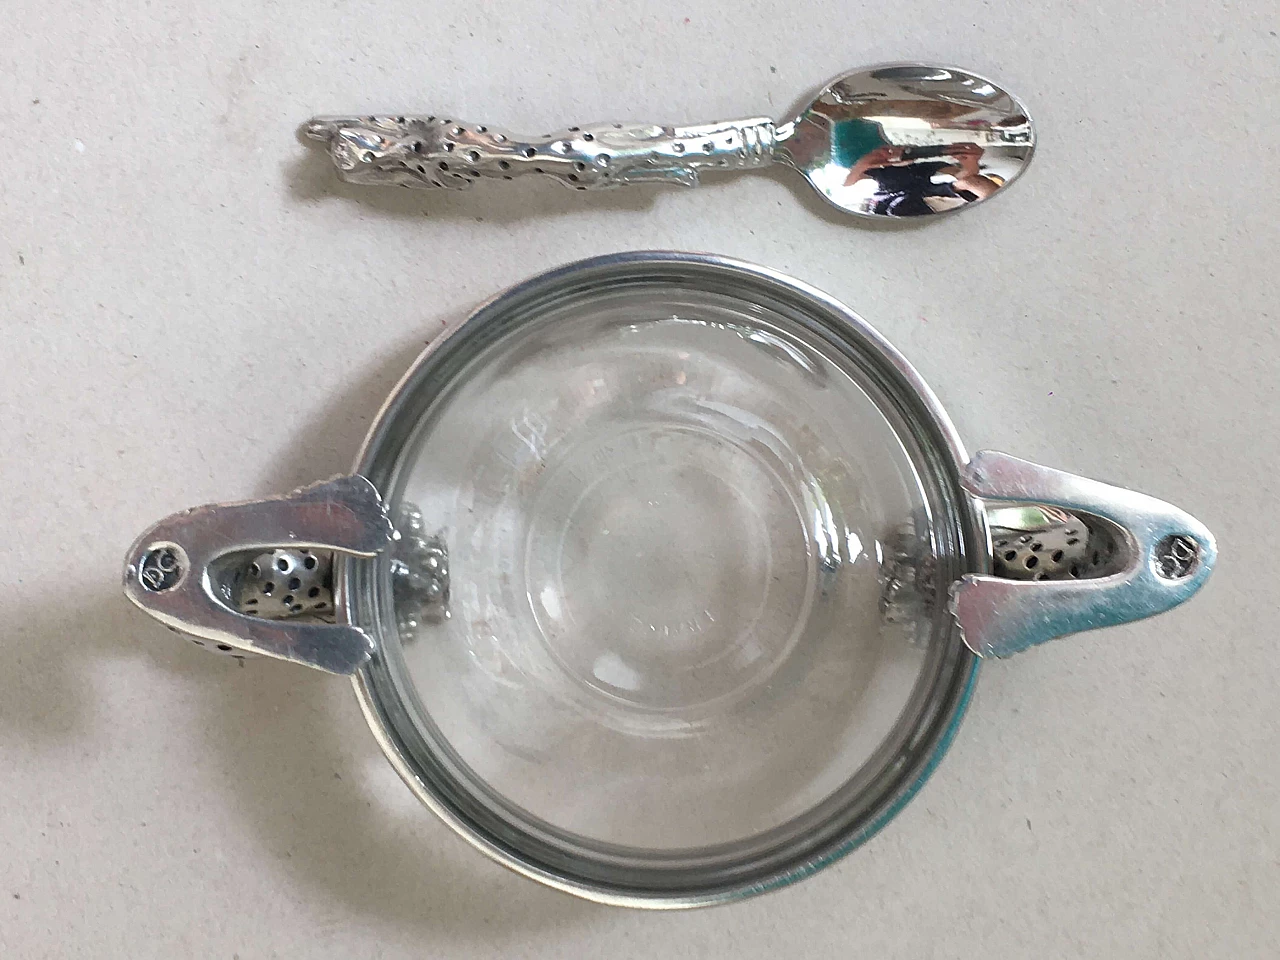 Glass and metal bowl and spoon with cheetahs 9